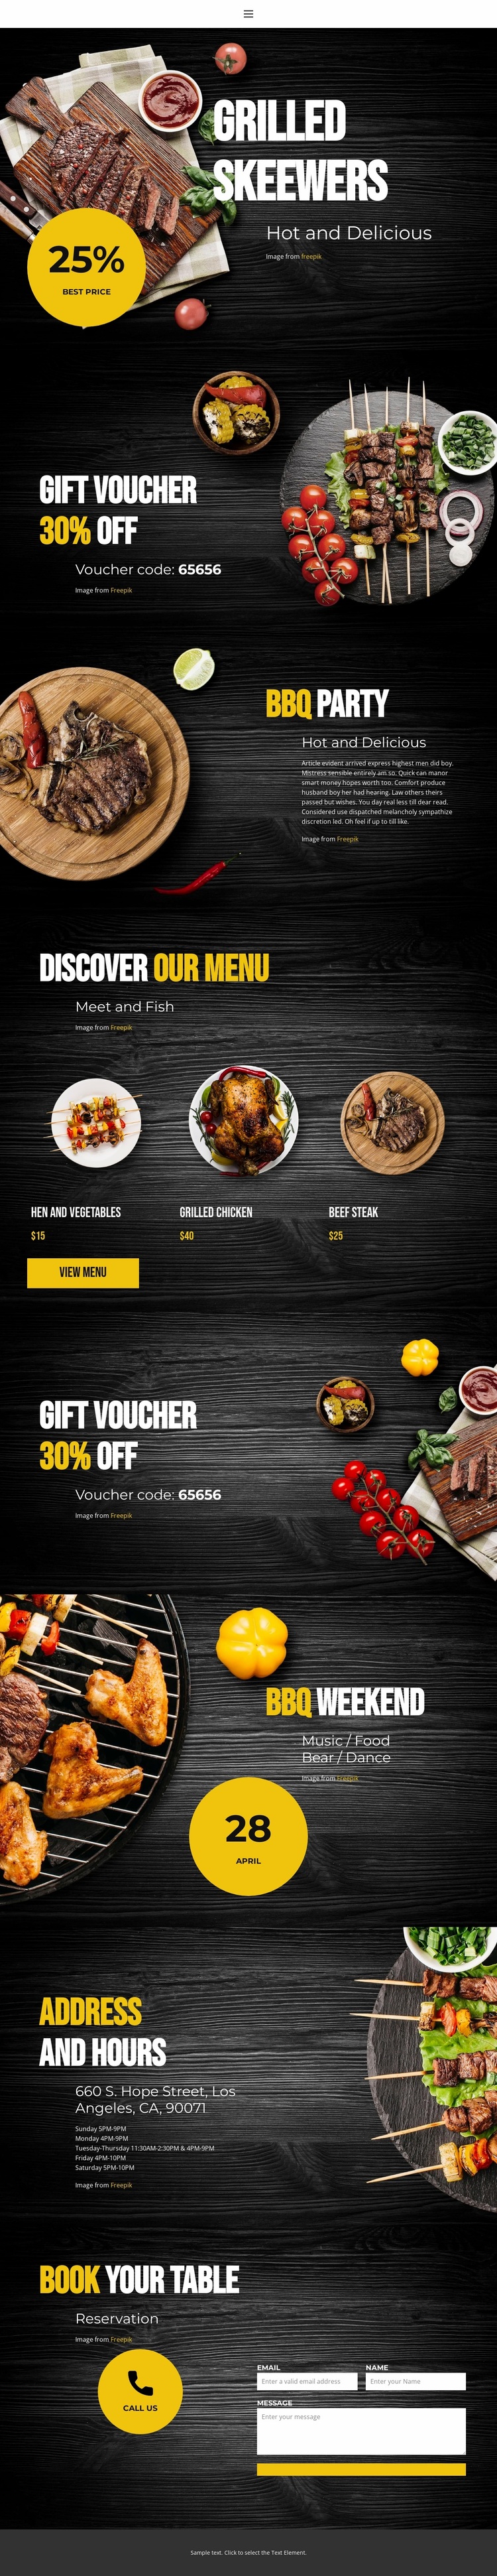 Hot and Delicious Website Design